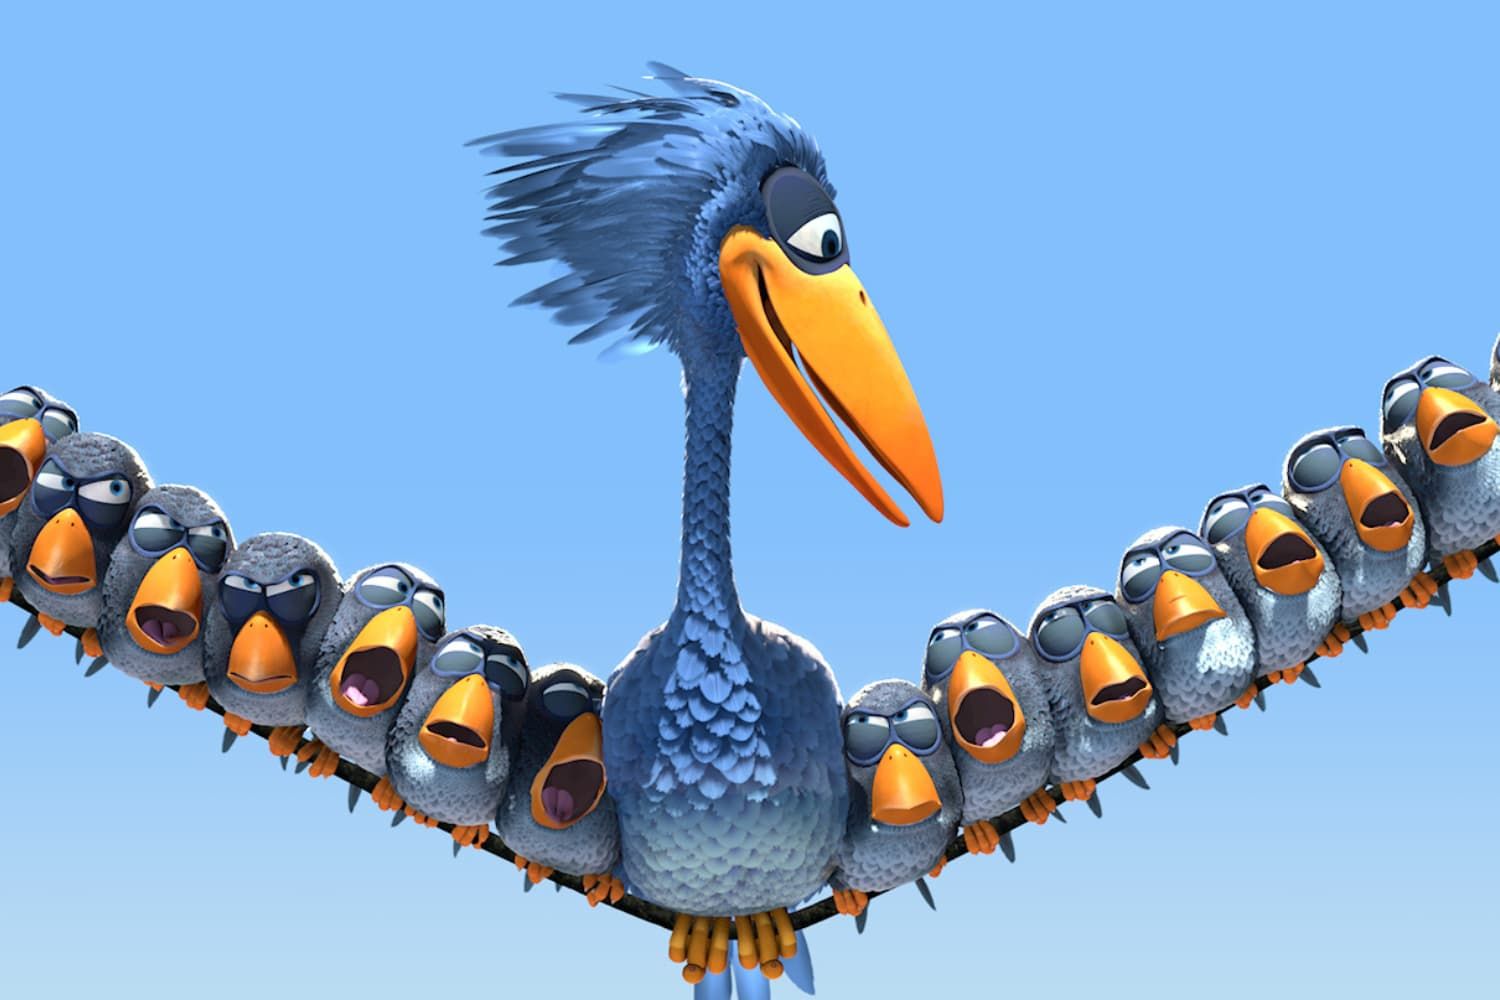 For%20the%20birds%20animation%20video%20Pixar-7d81b3b5 Hunger and thirst